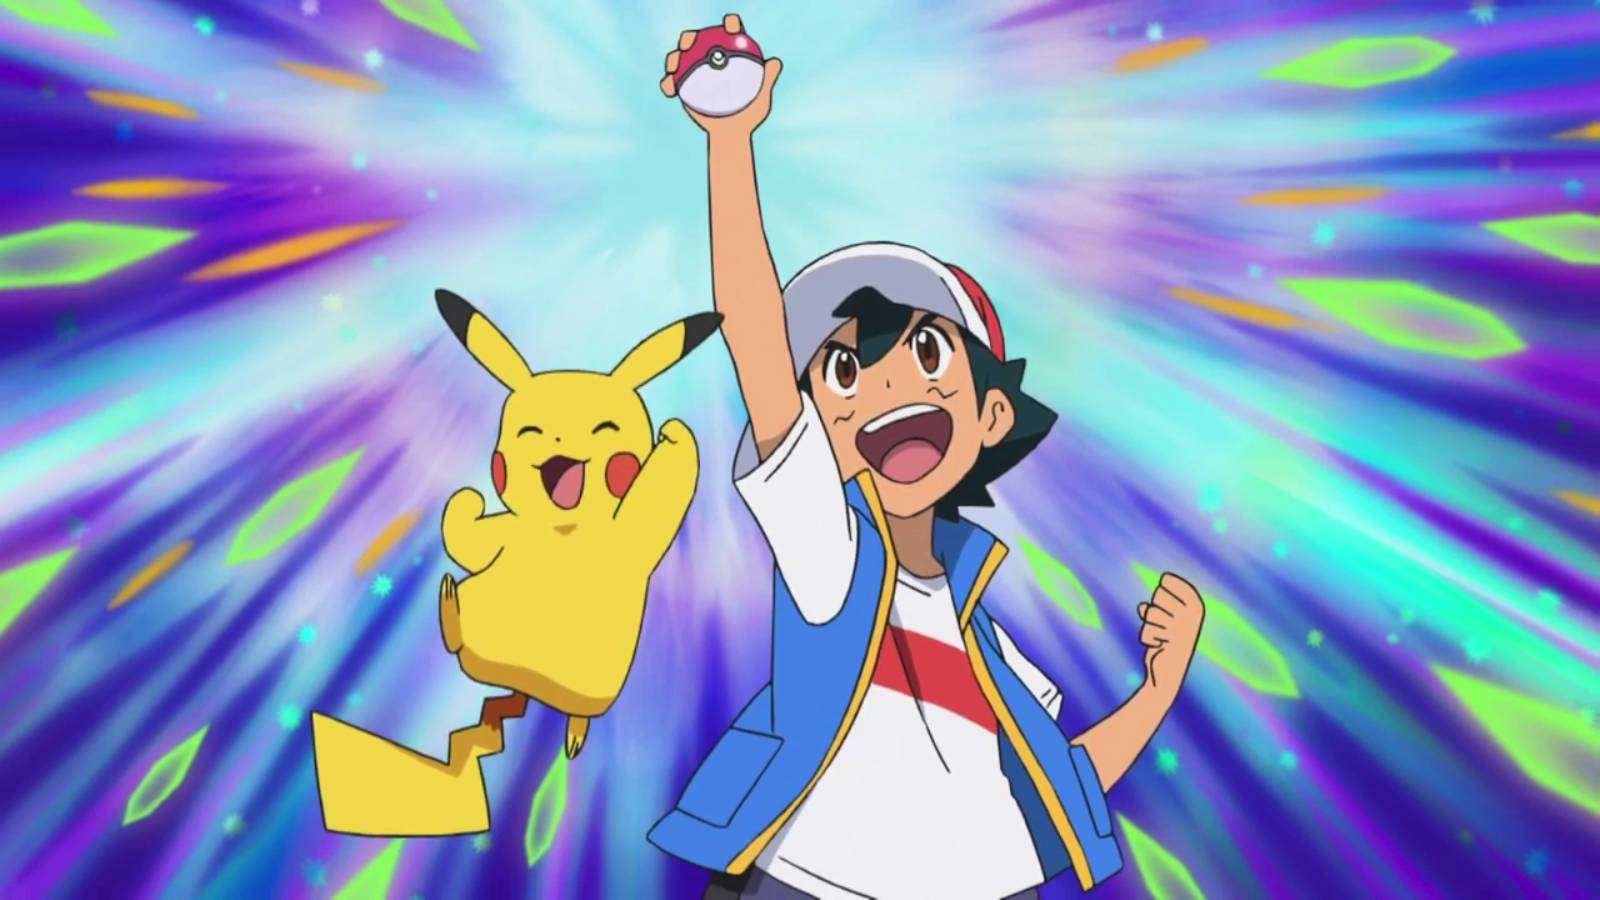 Ash Ketchum holds a Pokeball aloft, celebrating a catch, while his Pikachu joyously leaps into the air to his right